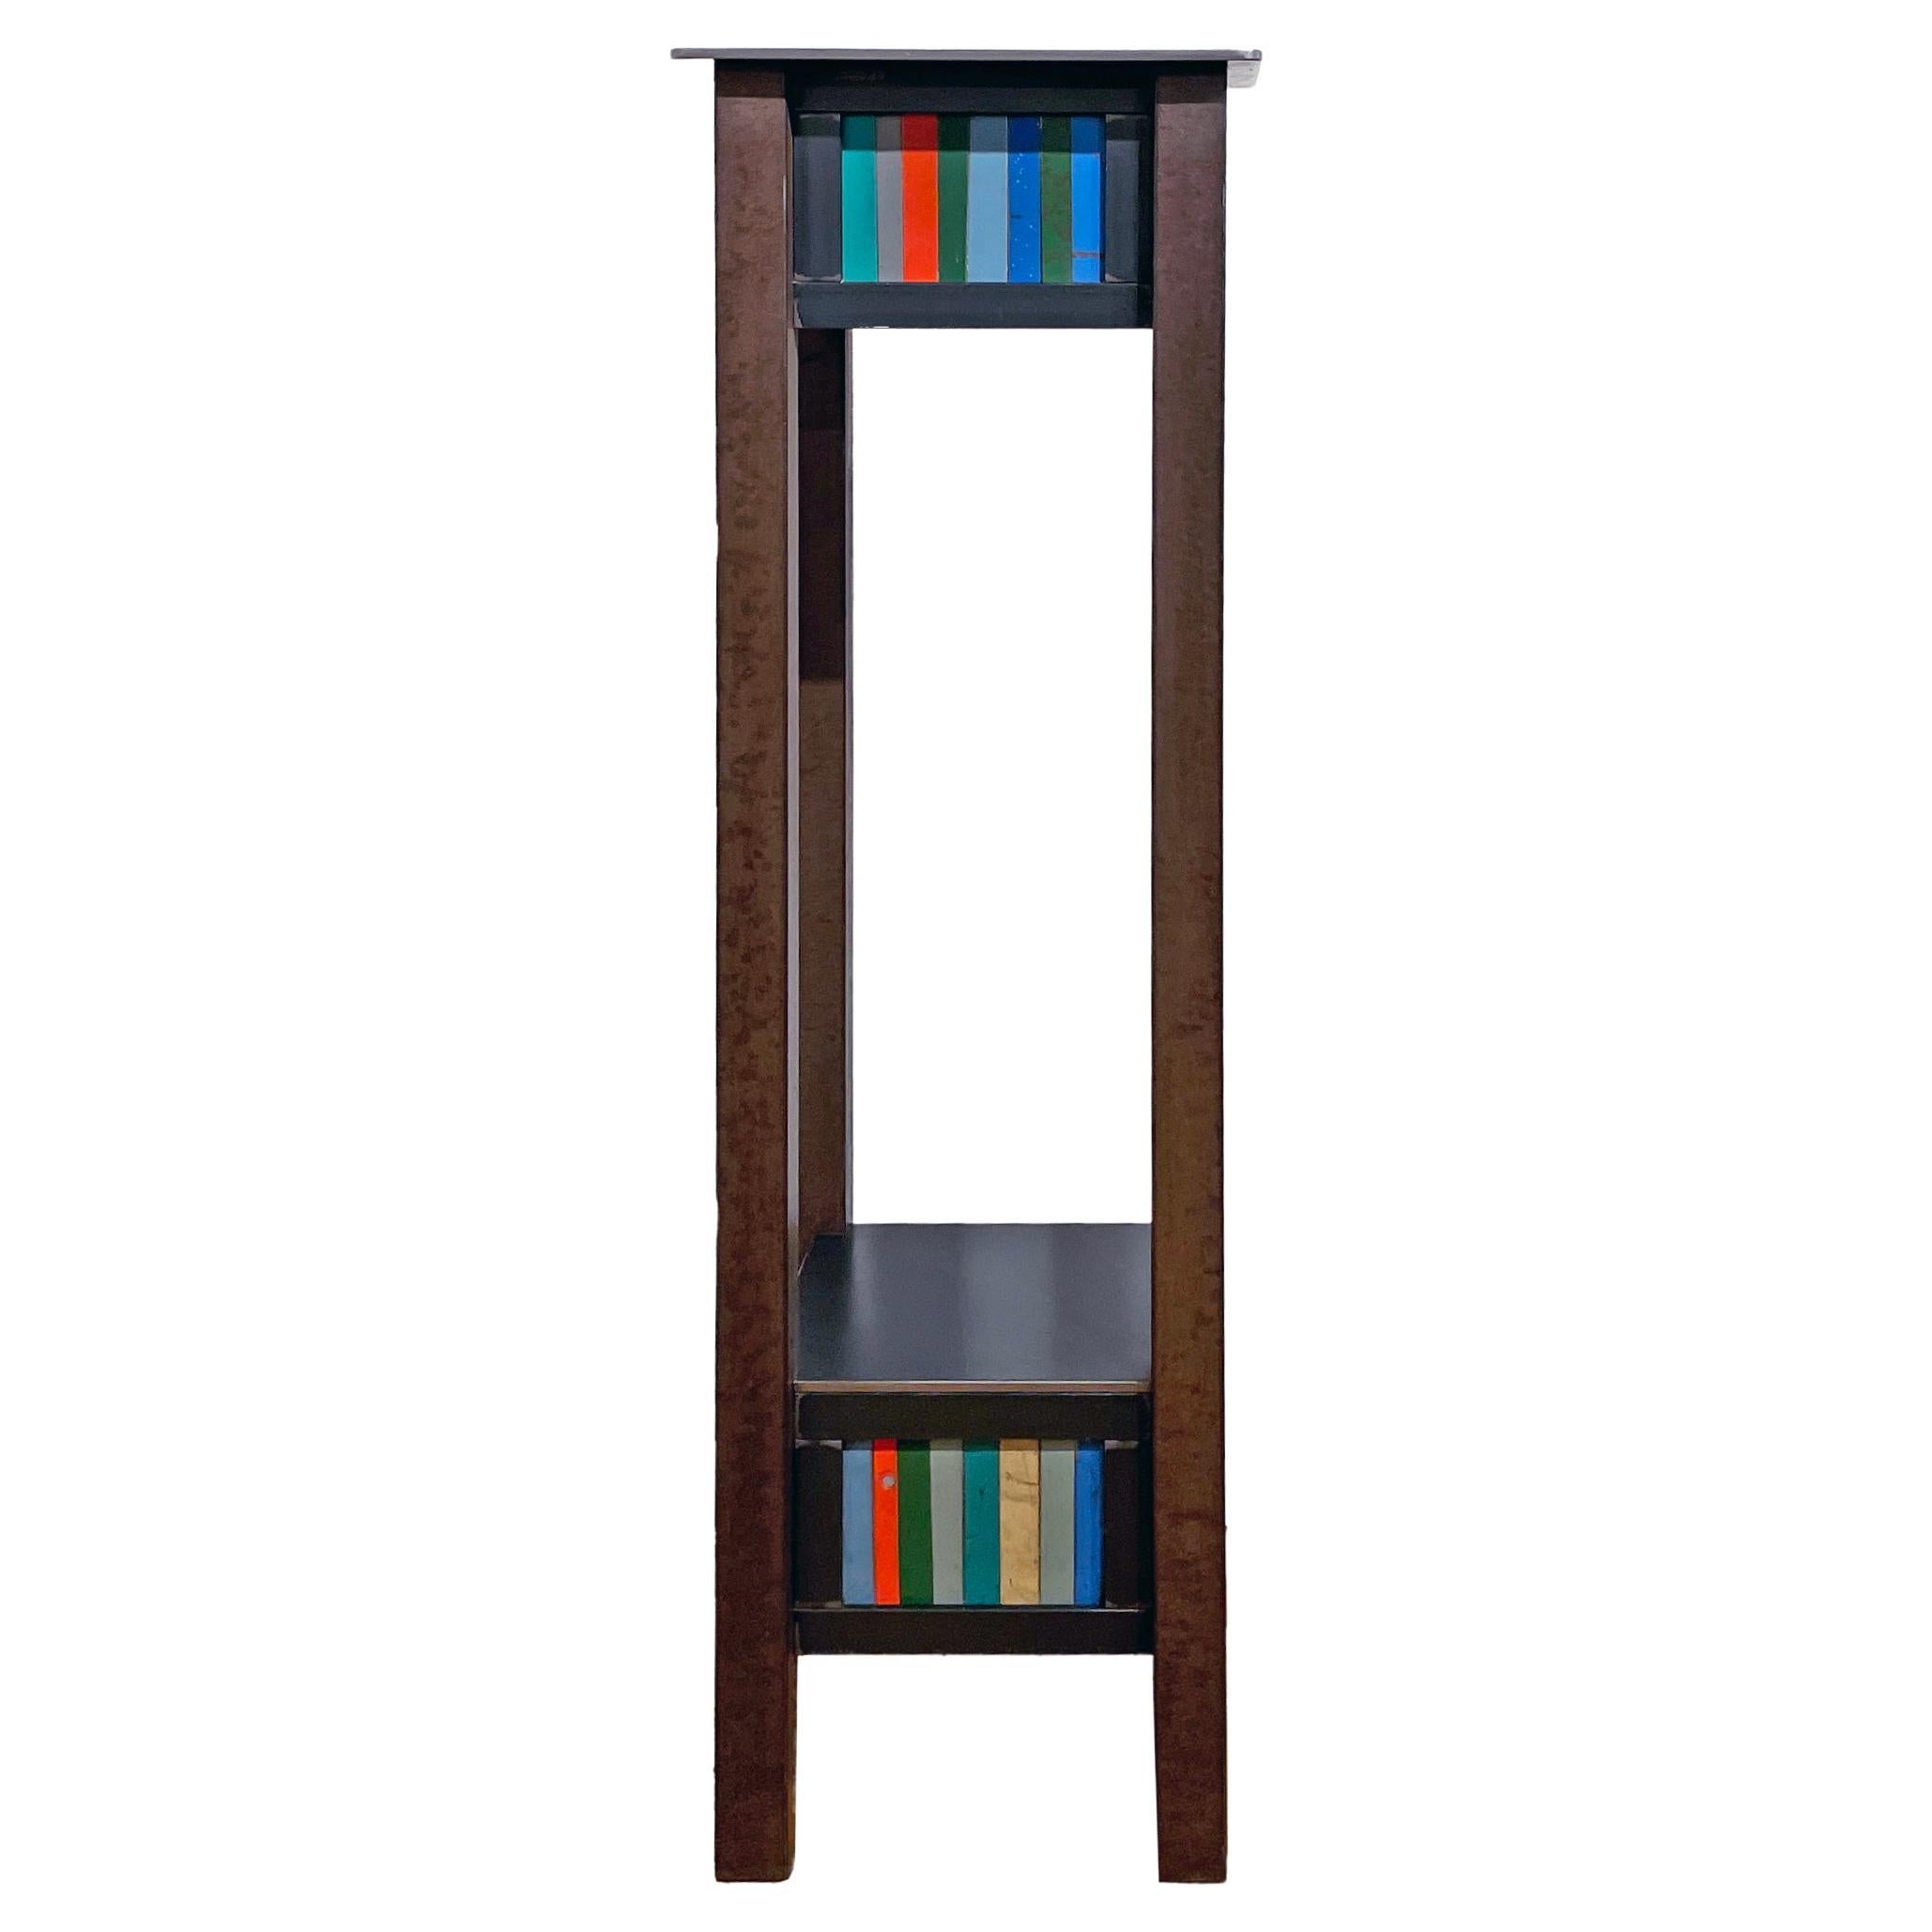 Jim Rose Steel Pedestal, Welded Steel with Shelf, Brightly Colored Quilt Pattern